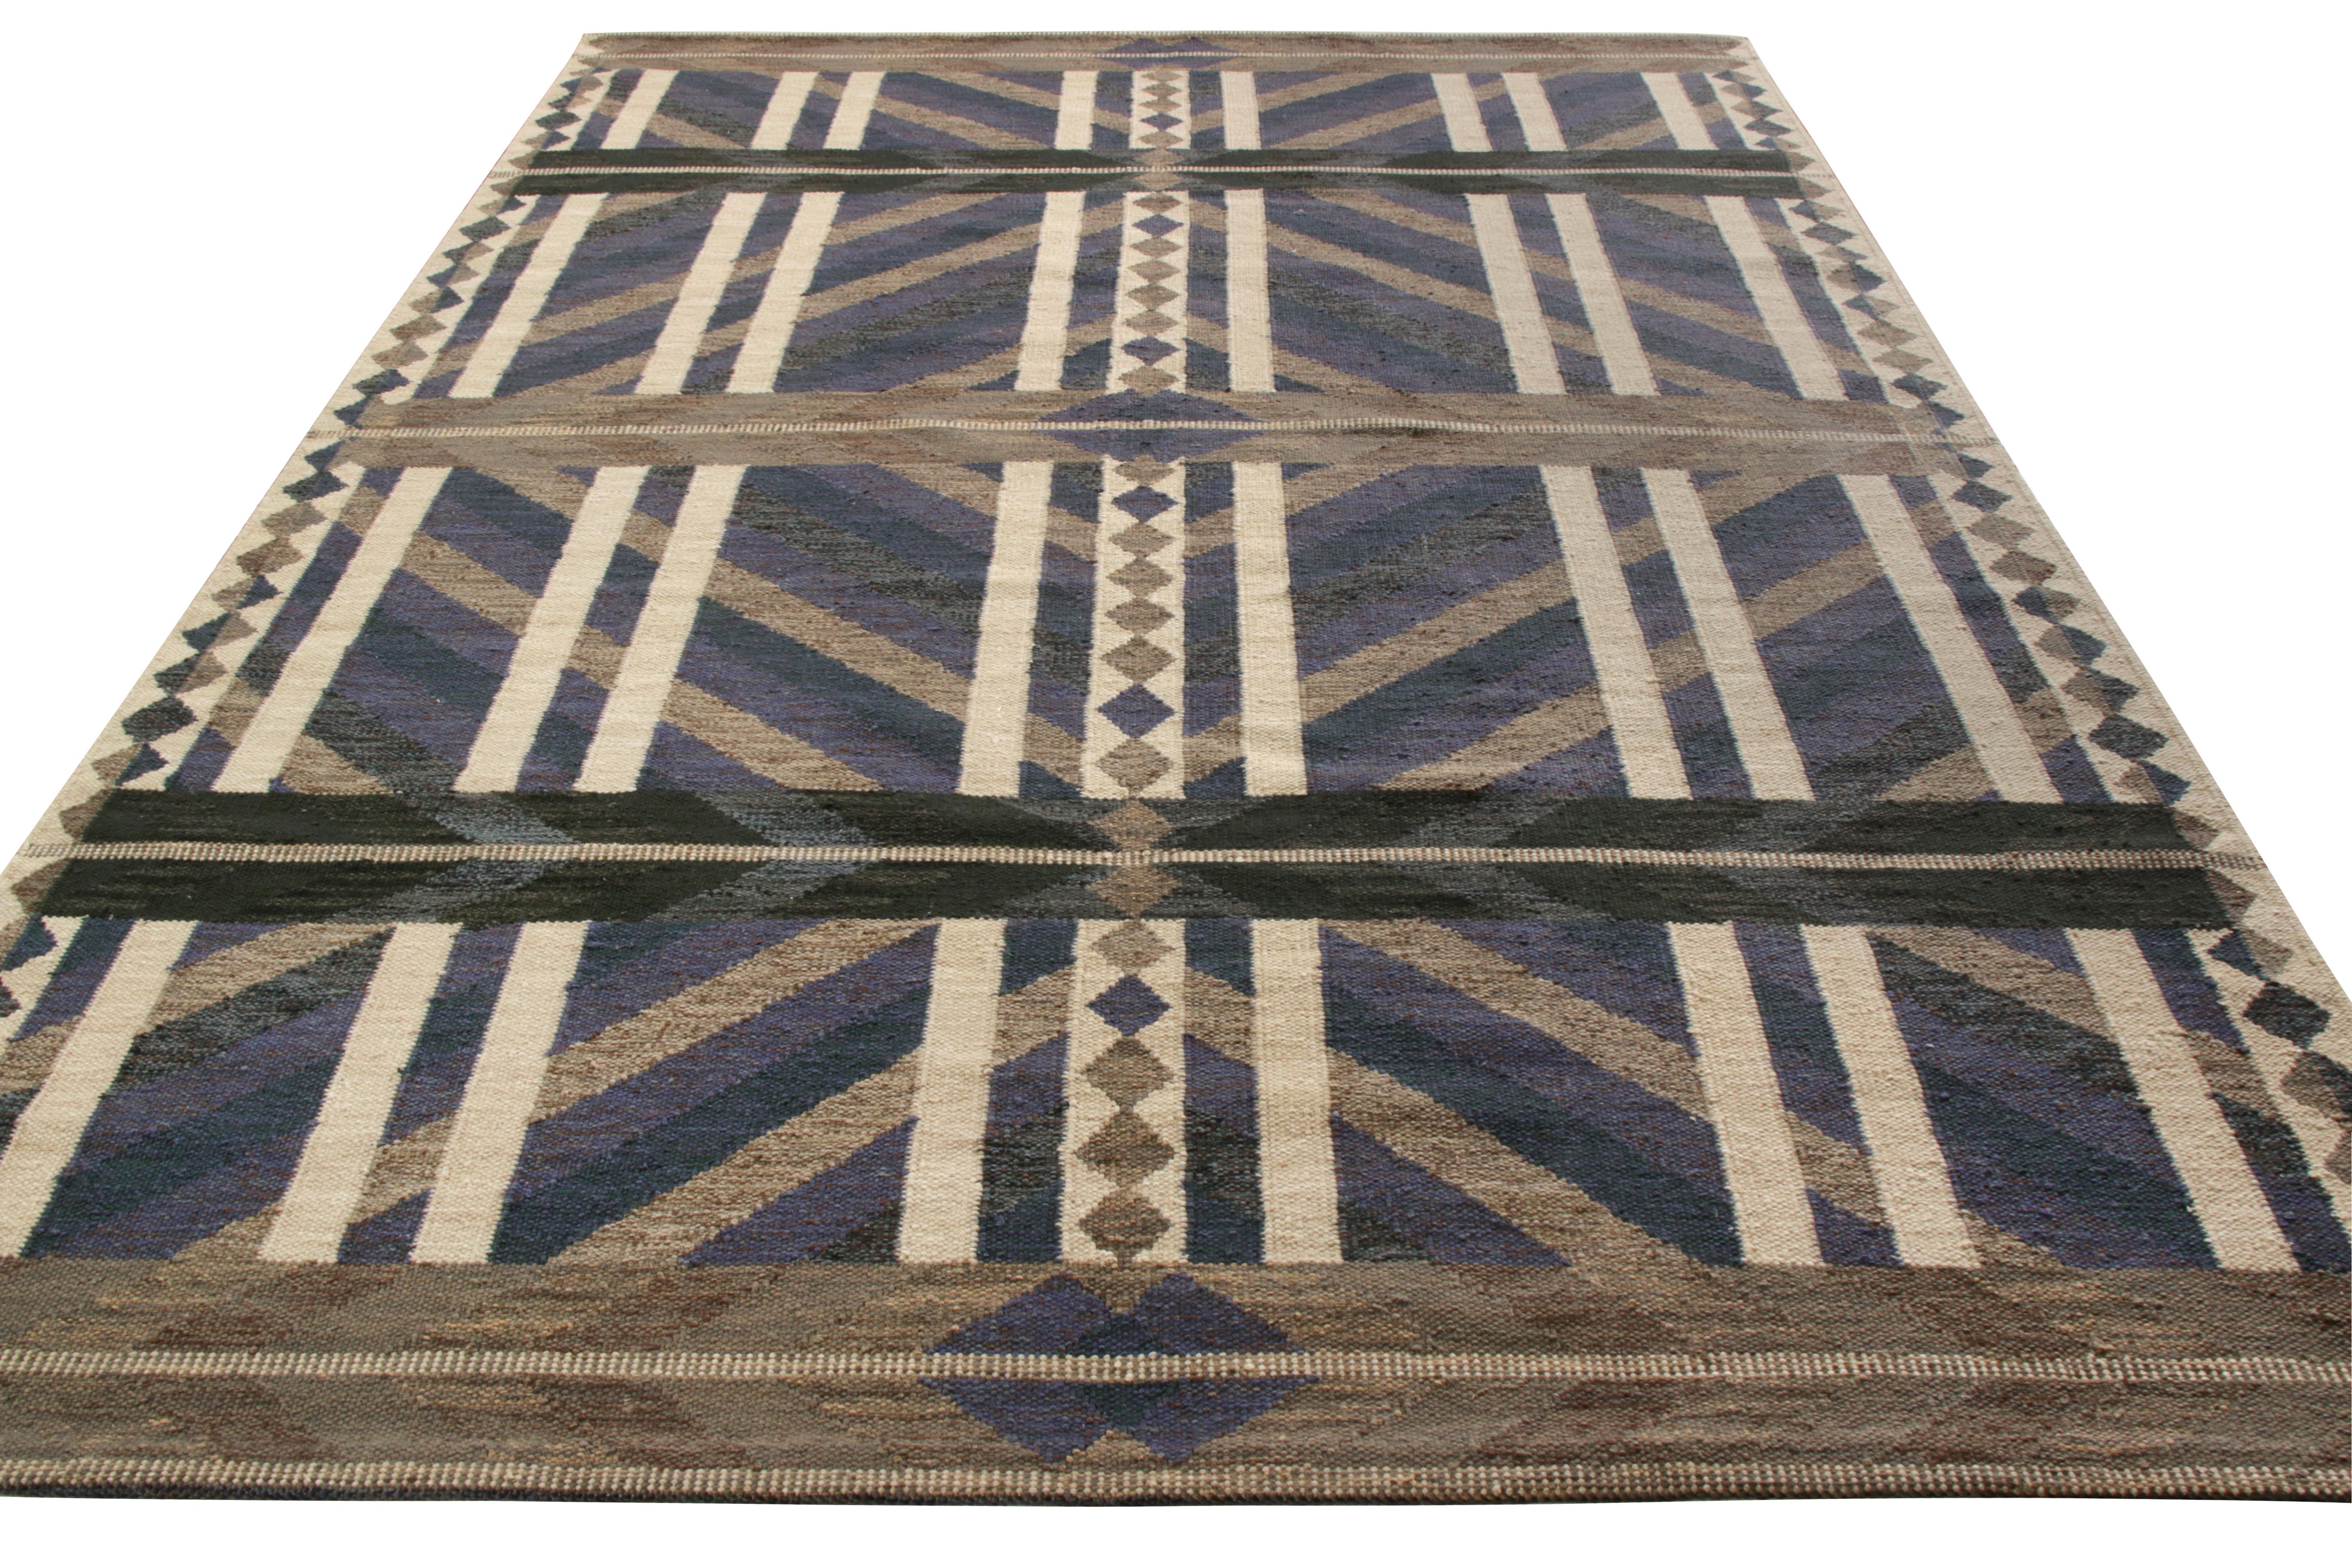 Basking in modern sensibilities, this Scandanavian kilim displays remarkable strength underfoot owing to its strong foundation that Rug & Kilim’s flatweaves of the titular collection enjoy. The chic shades of blue and beige-gray tastefully intercede